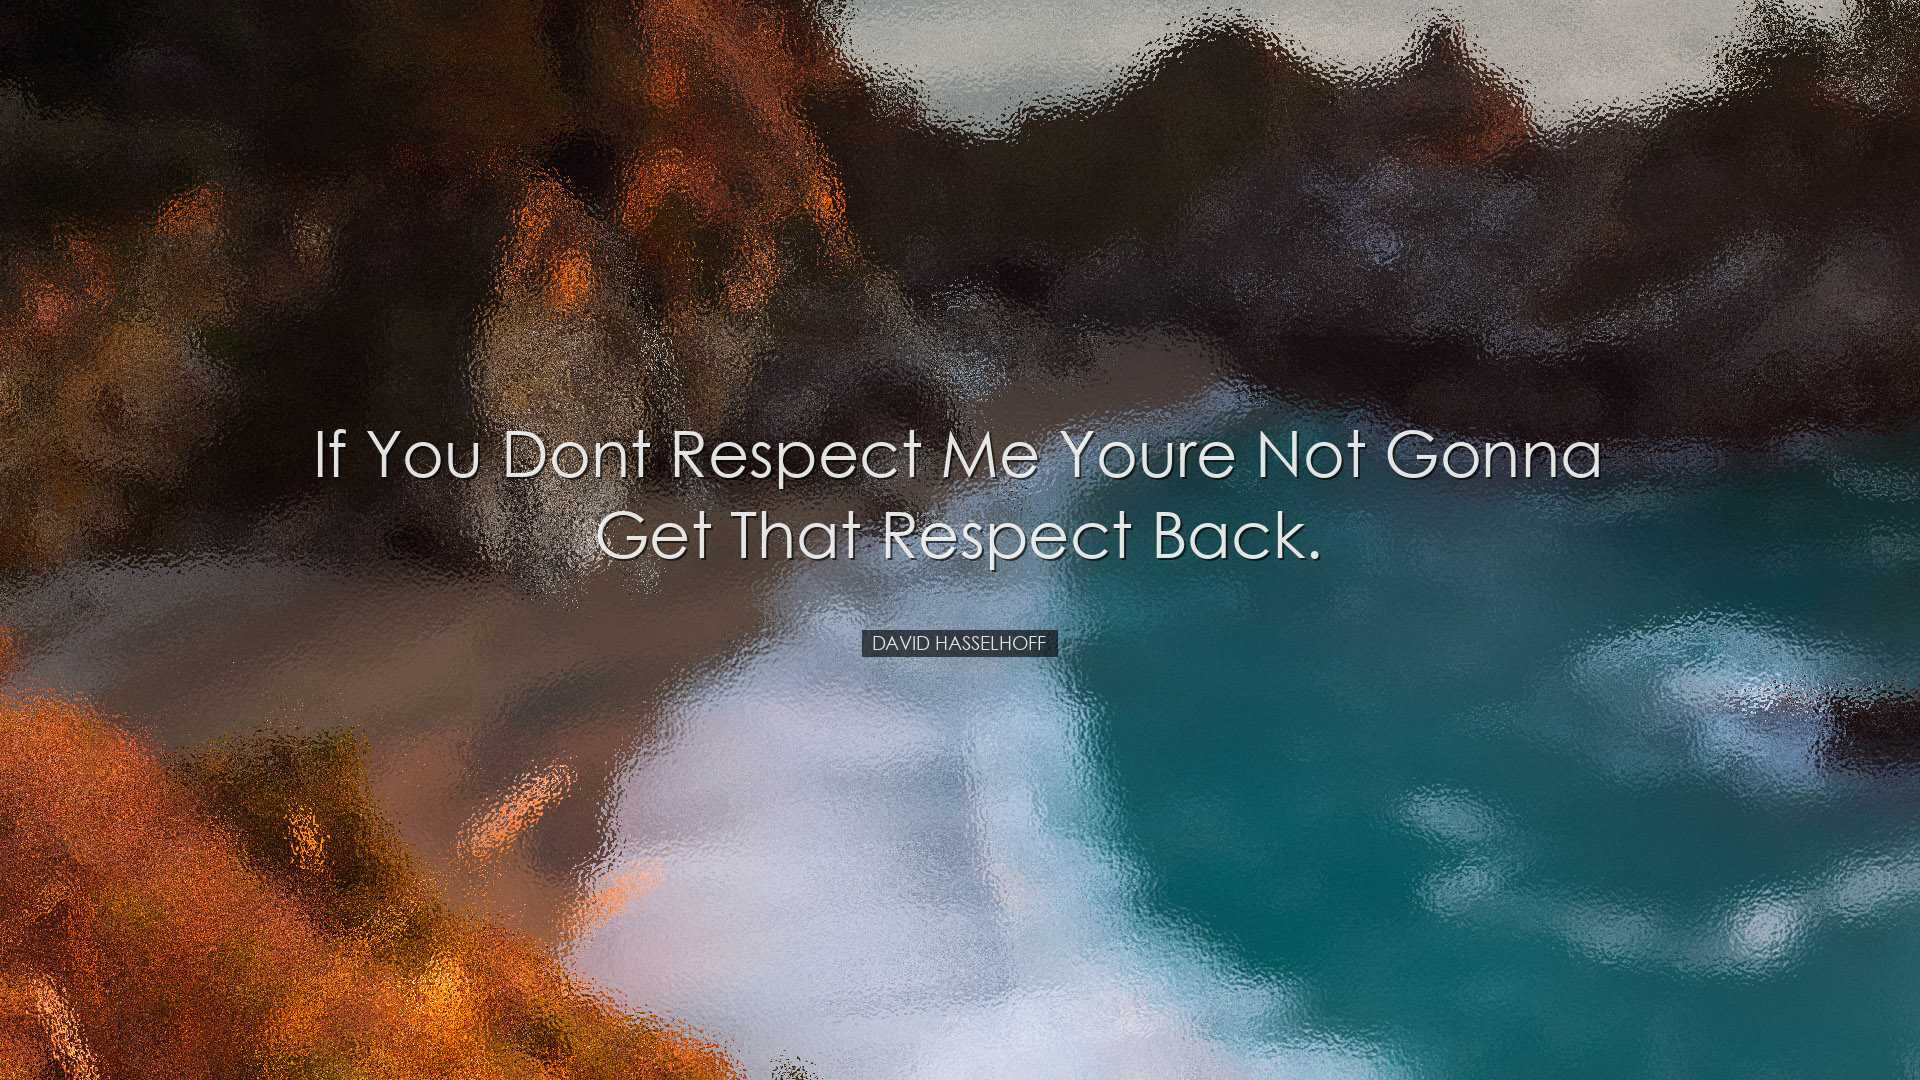 If you dont respect me youre not gonna get that respect back. - Da